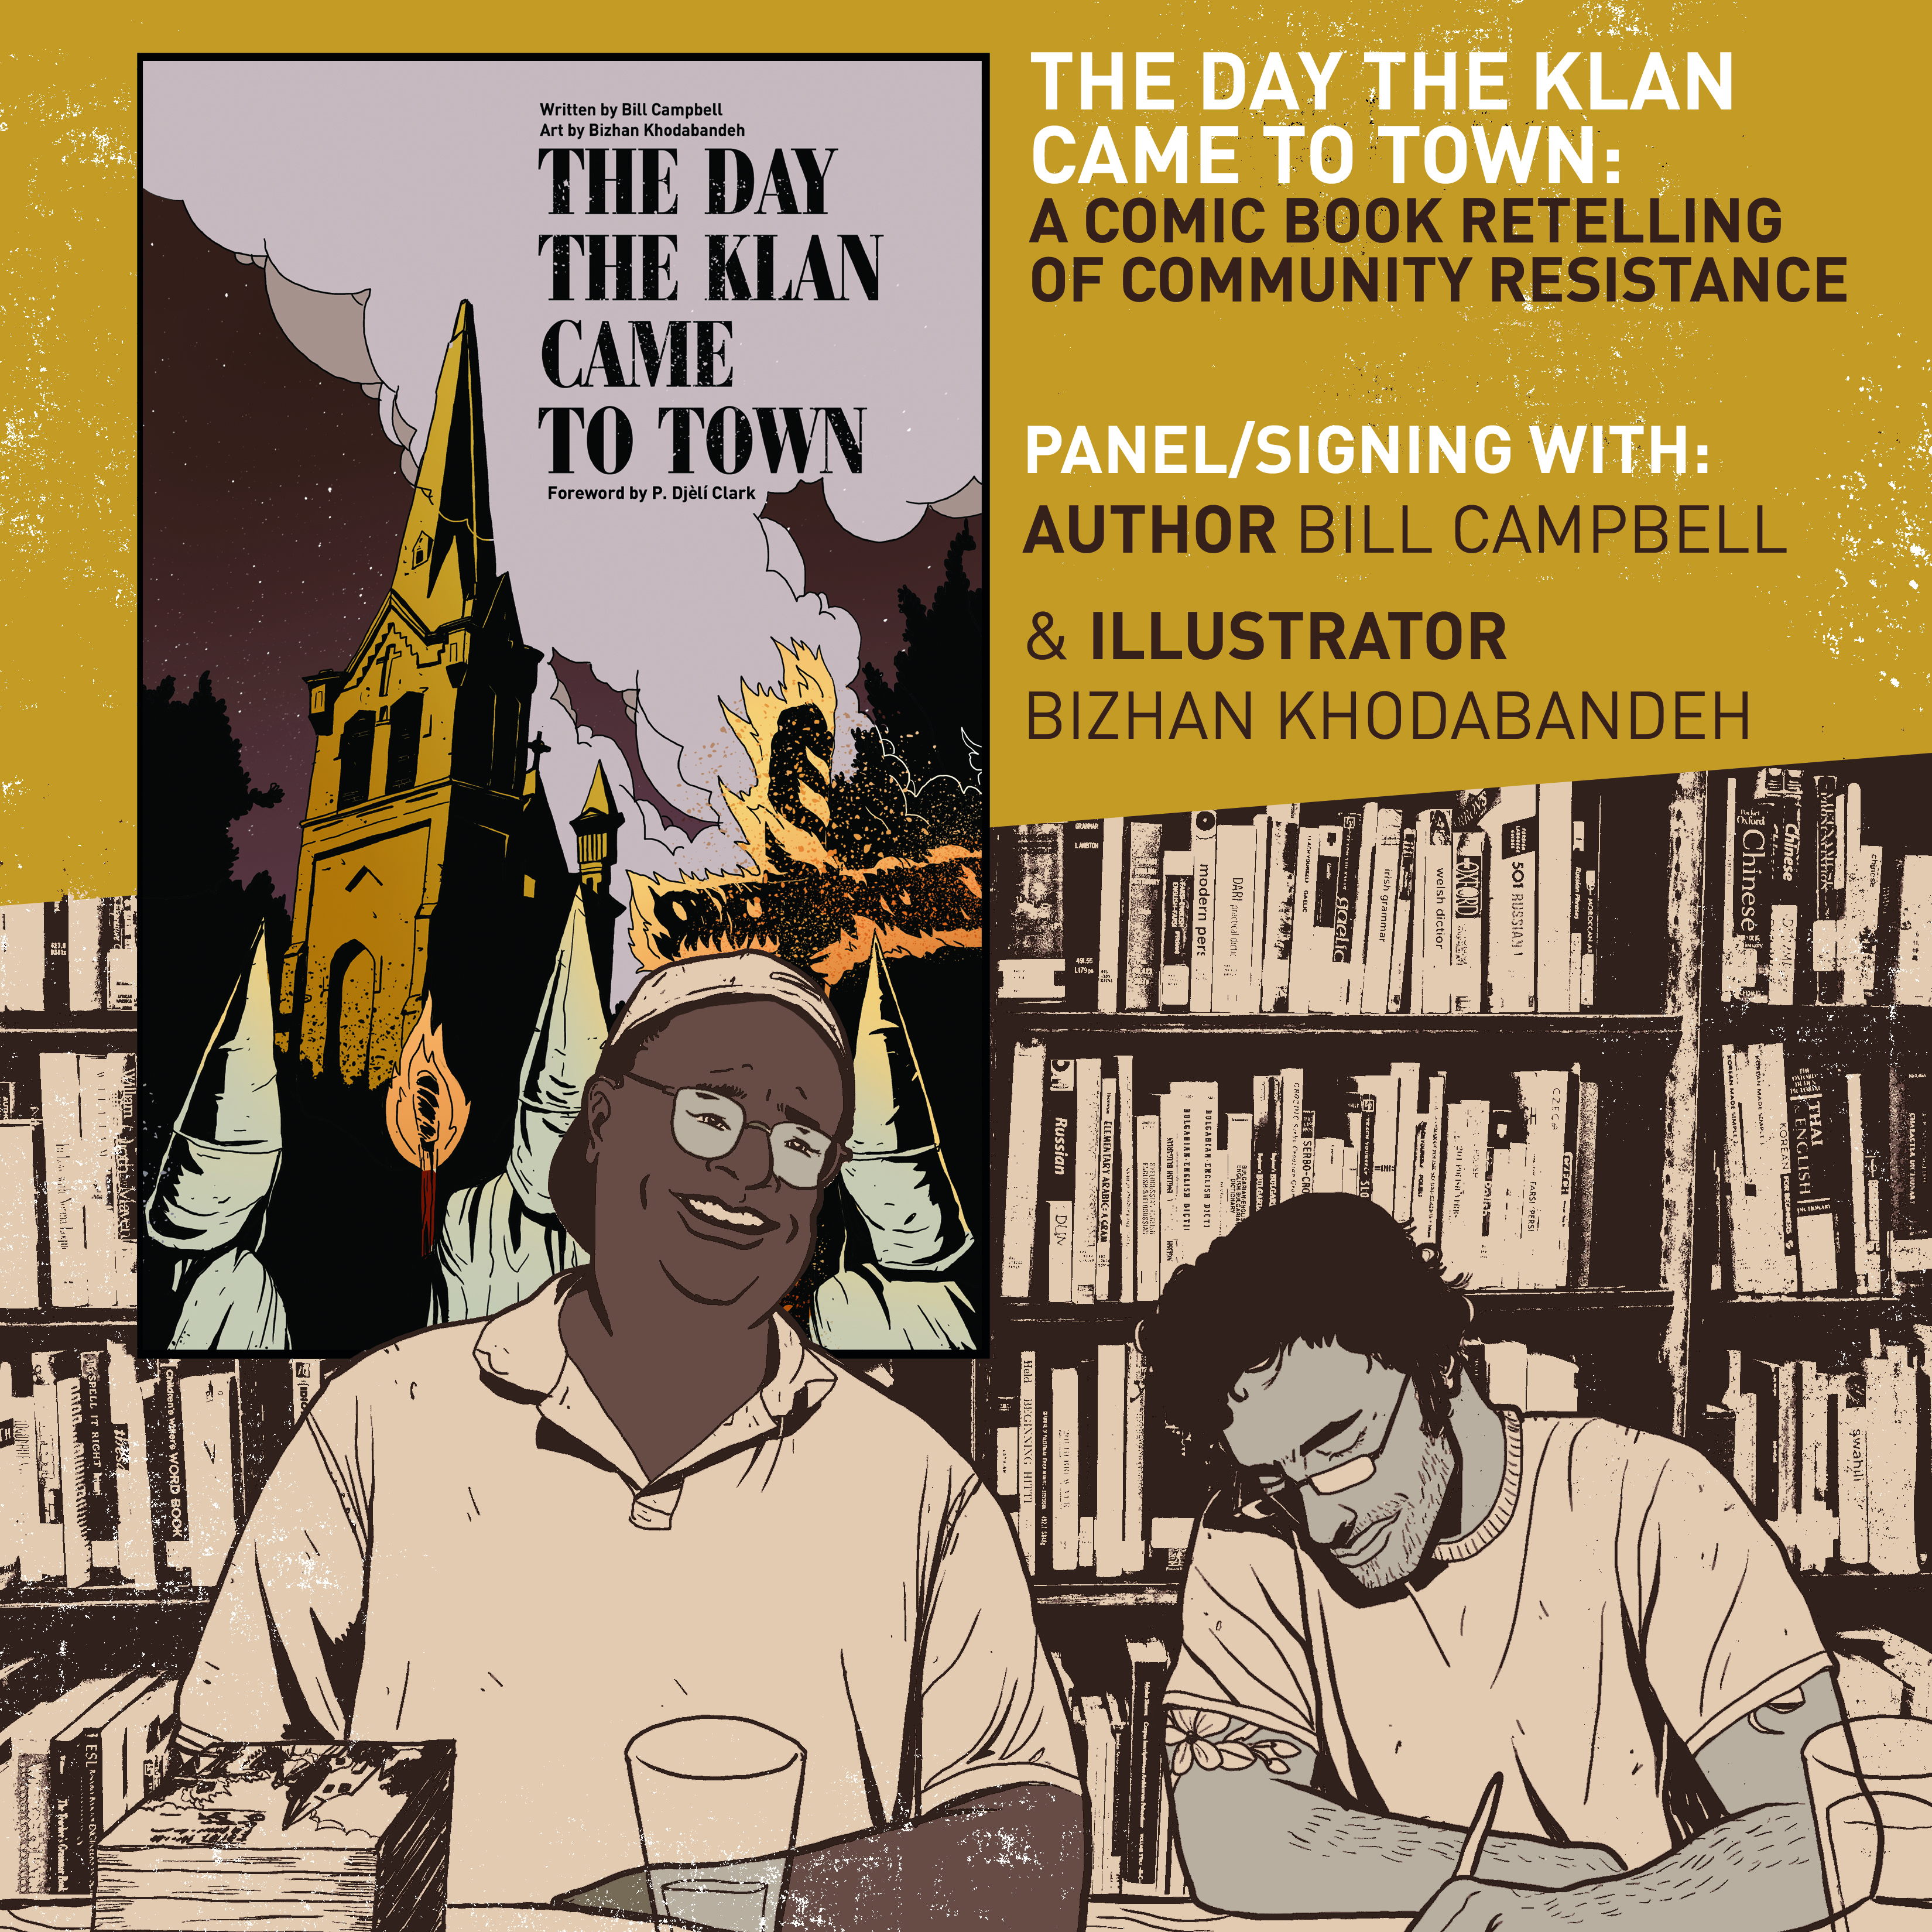 Comic art image of Bill Campbell and Bizhan Khodabandeh seated at a book signing table. Behind them are book shelves. And in the top left corner is the cover of their graphic novel, The Day the Klan Came to Town.